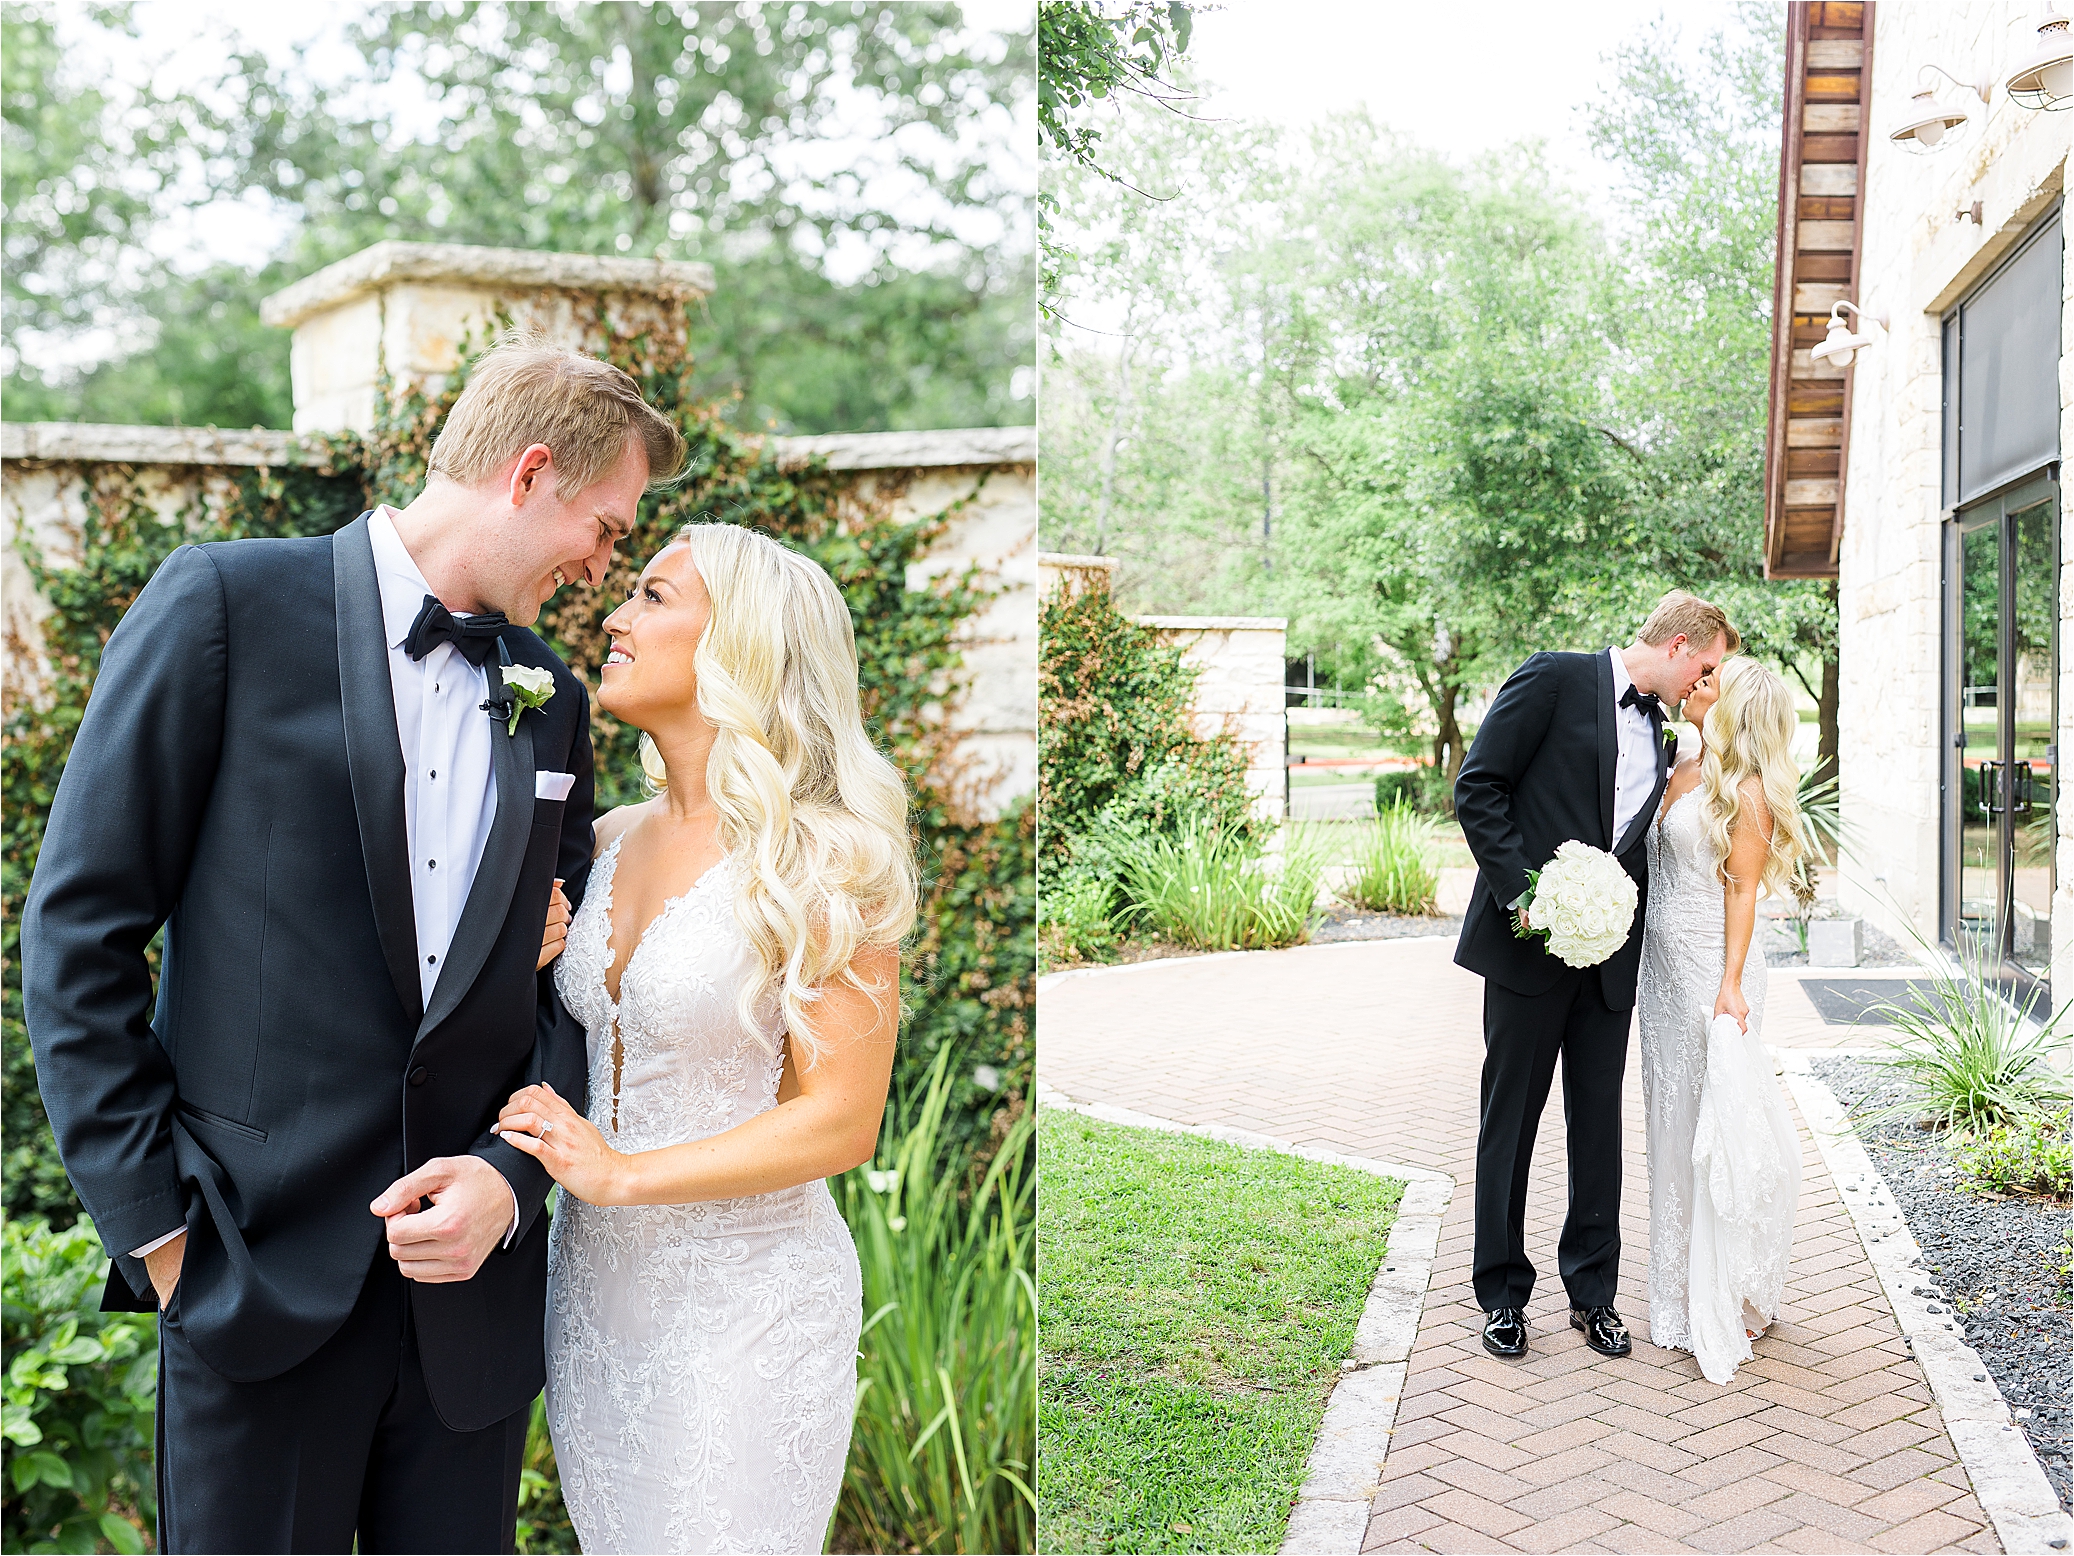 A bride and groom look at each other and share a kiss in front of greenery wedding at their Brodie Homestead wedding venue in Austin, Texas